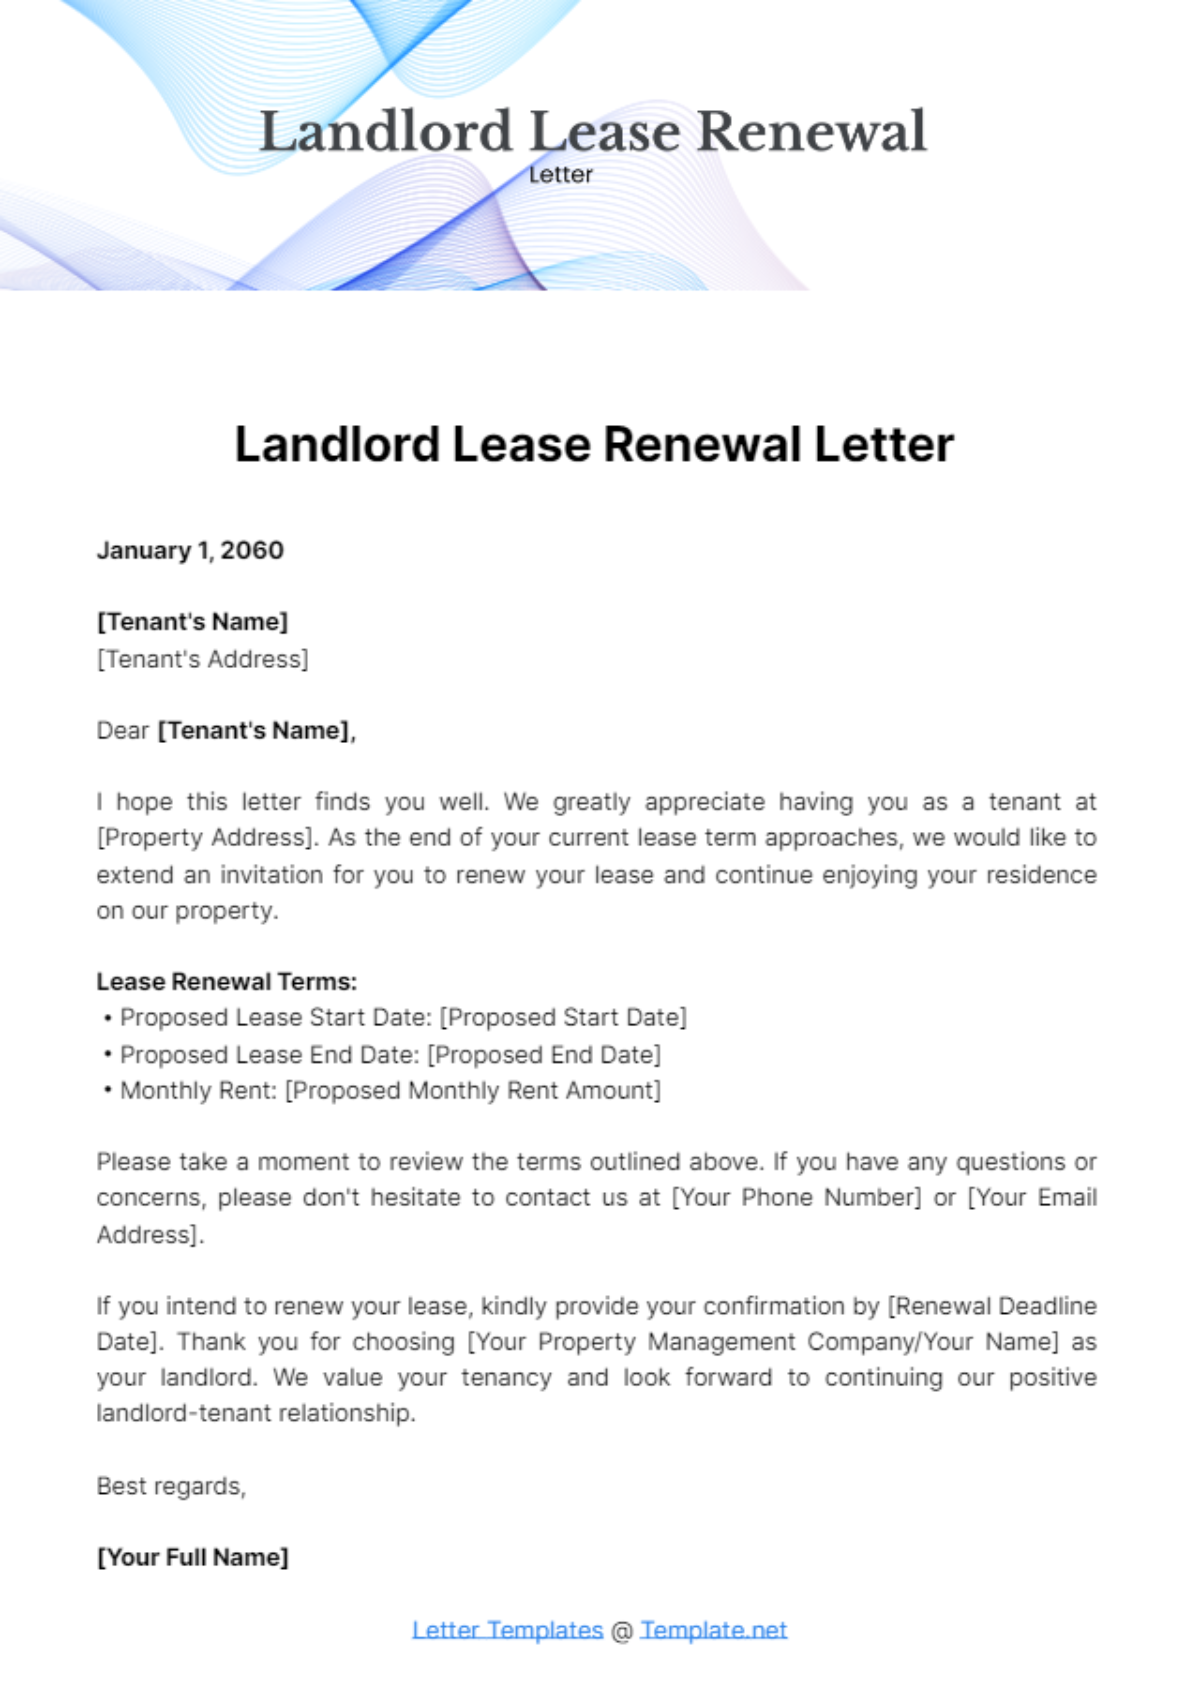 Landlord Lease Renewal Letter Template